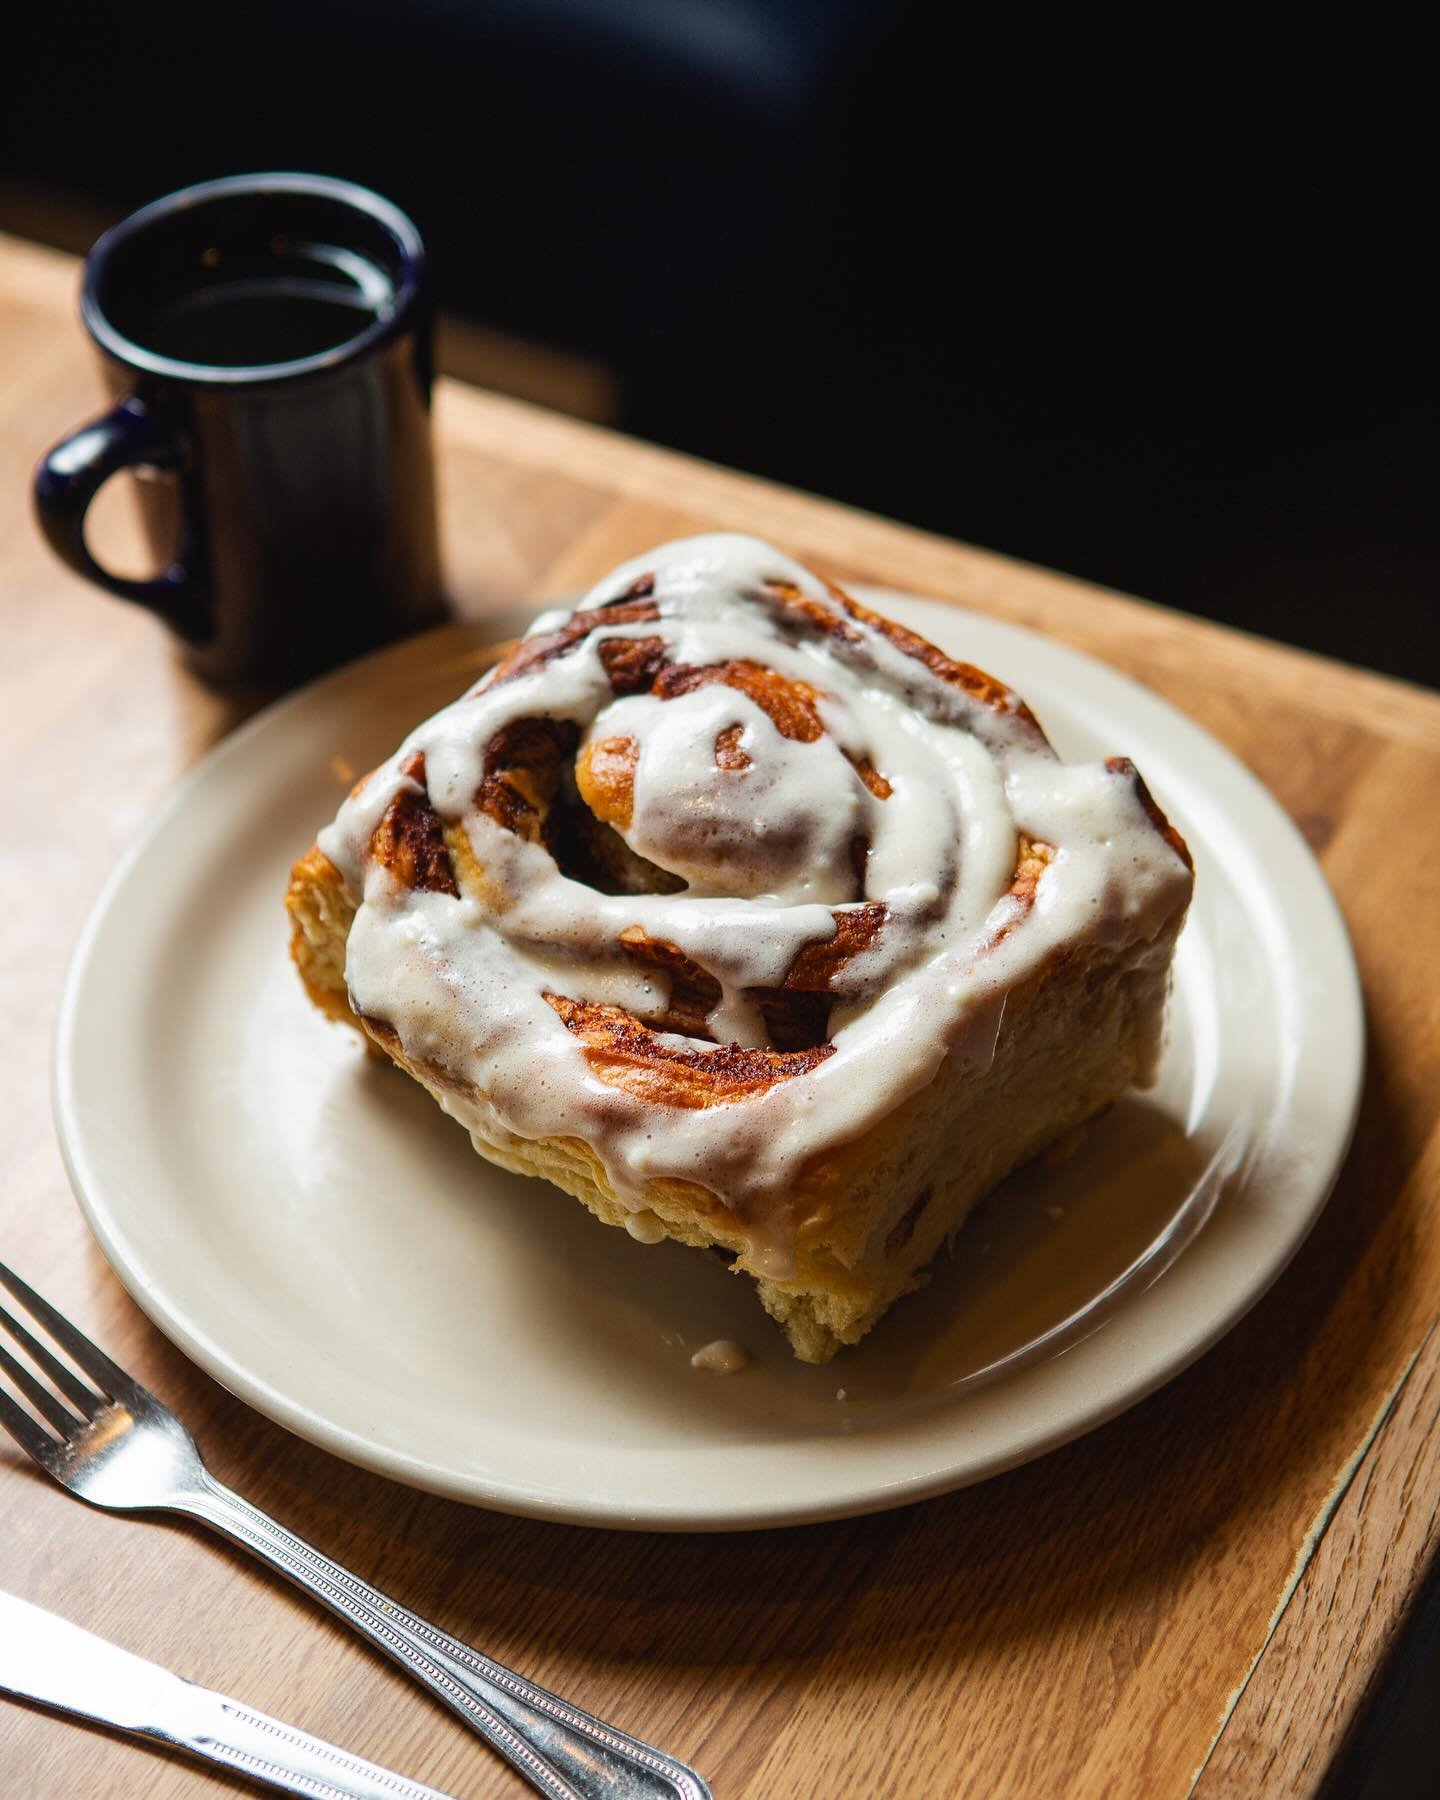 Introducing our new Cinnamon Rolls! Our new standard cinnamon roll is huge and gooey and topped with cream cheese icing. The perfect cinnamon roll. We took that and filled it with bacon chunks and cinnamon inside and then topped with maple icing and 